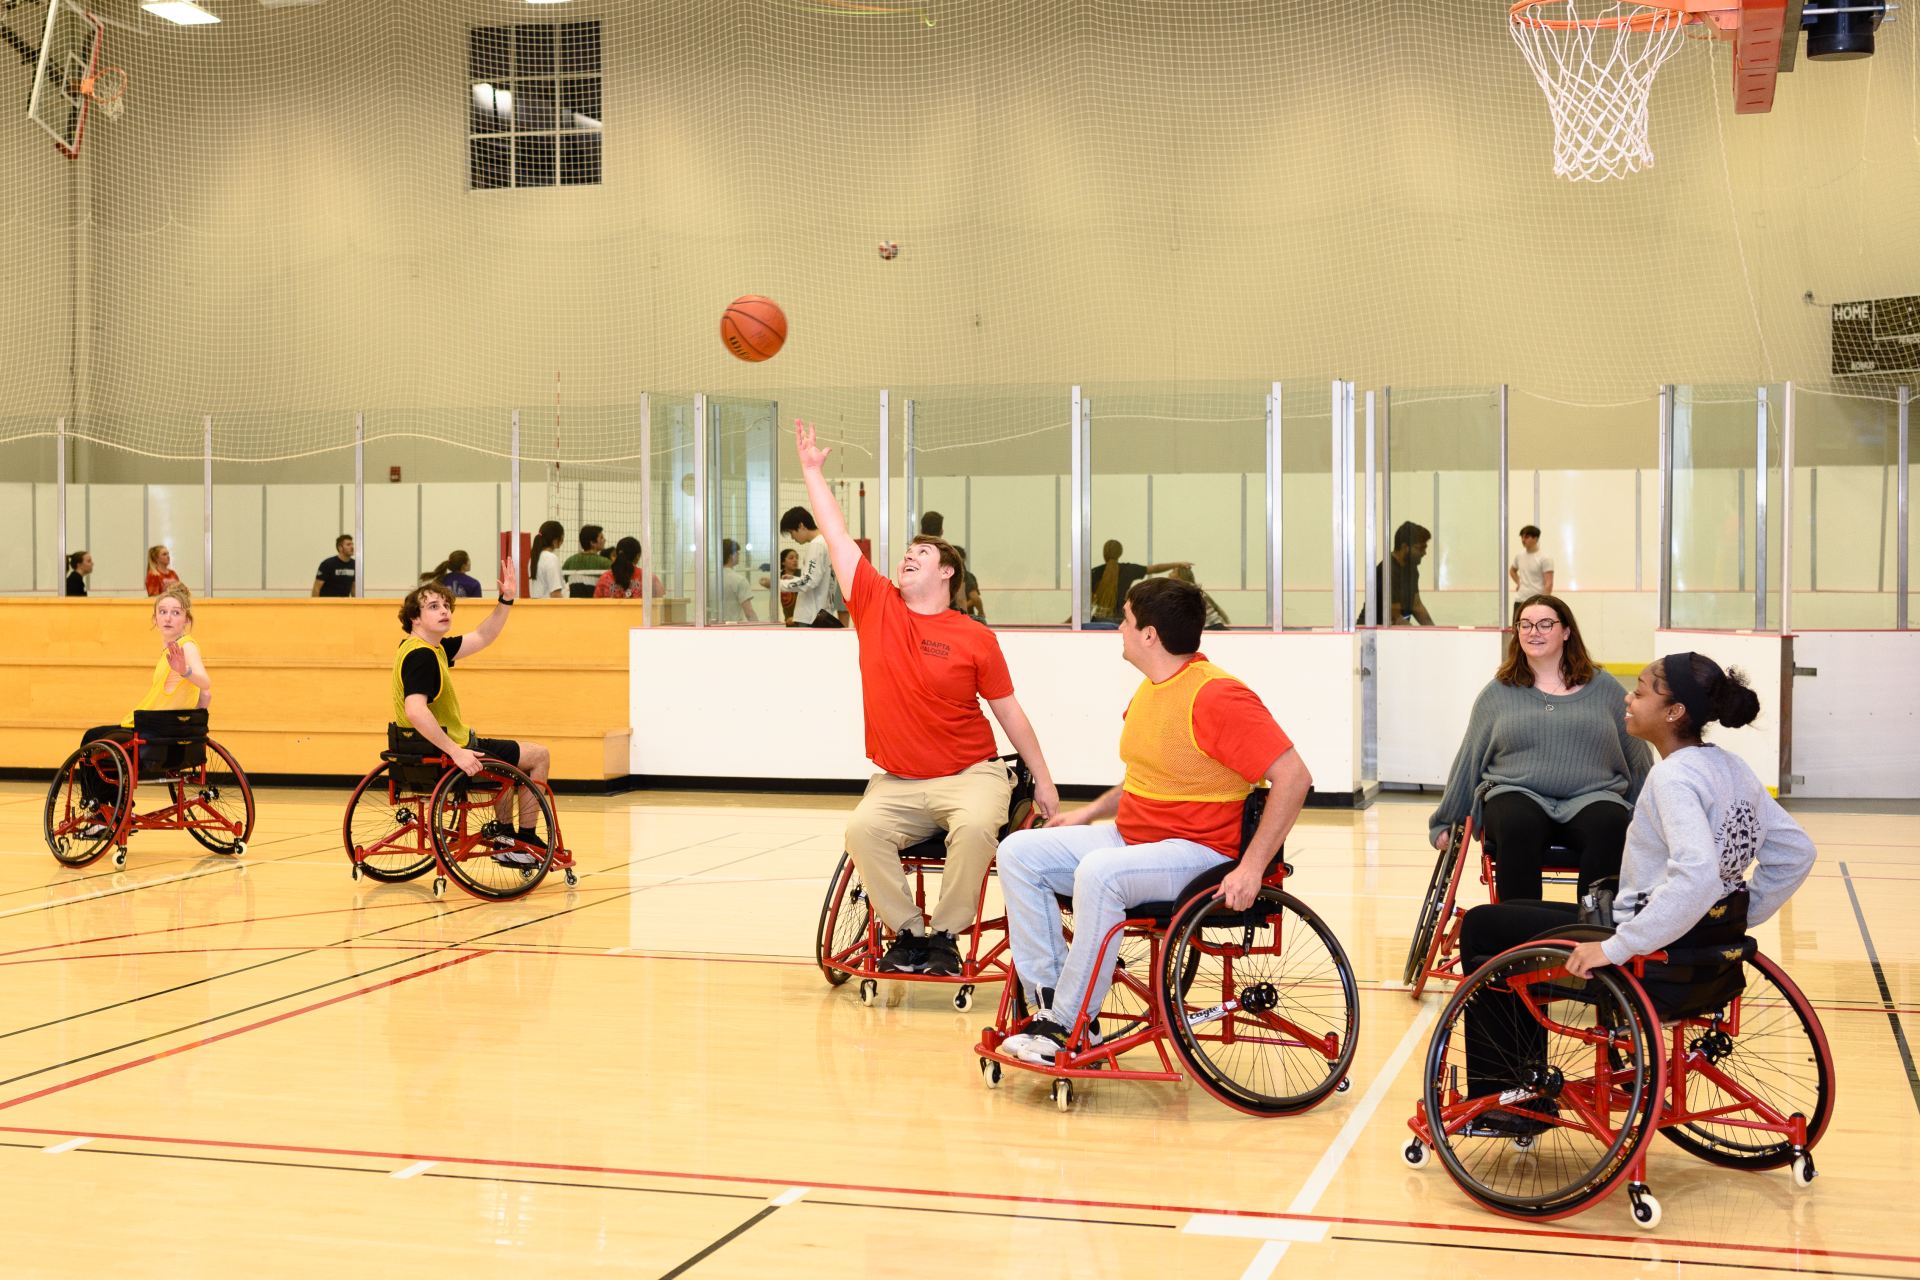 Local students introduced to 'cool' adaptive sports (4 photos) - Orillia  News